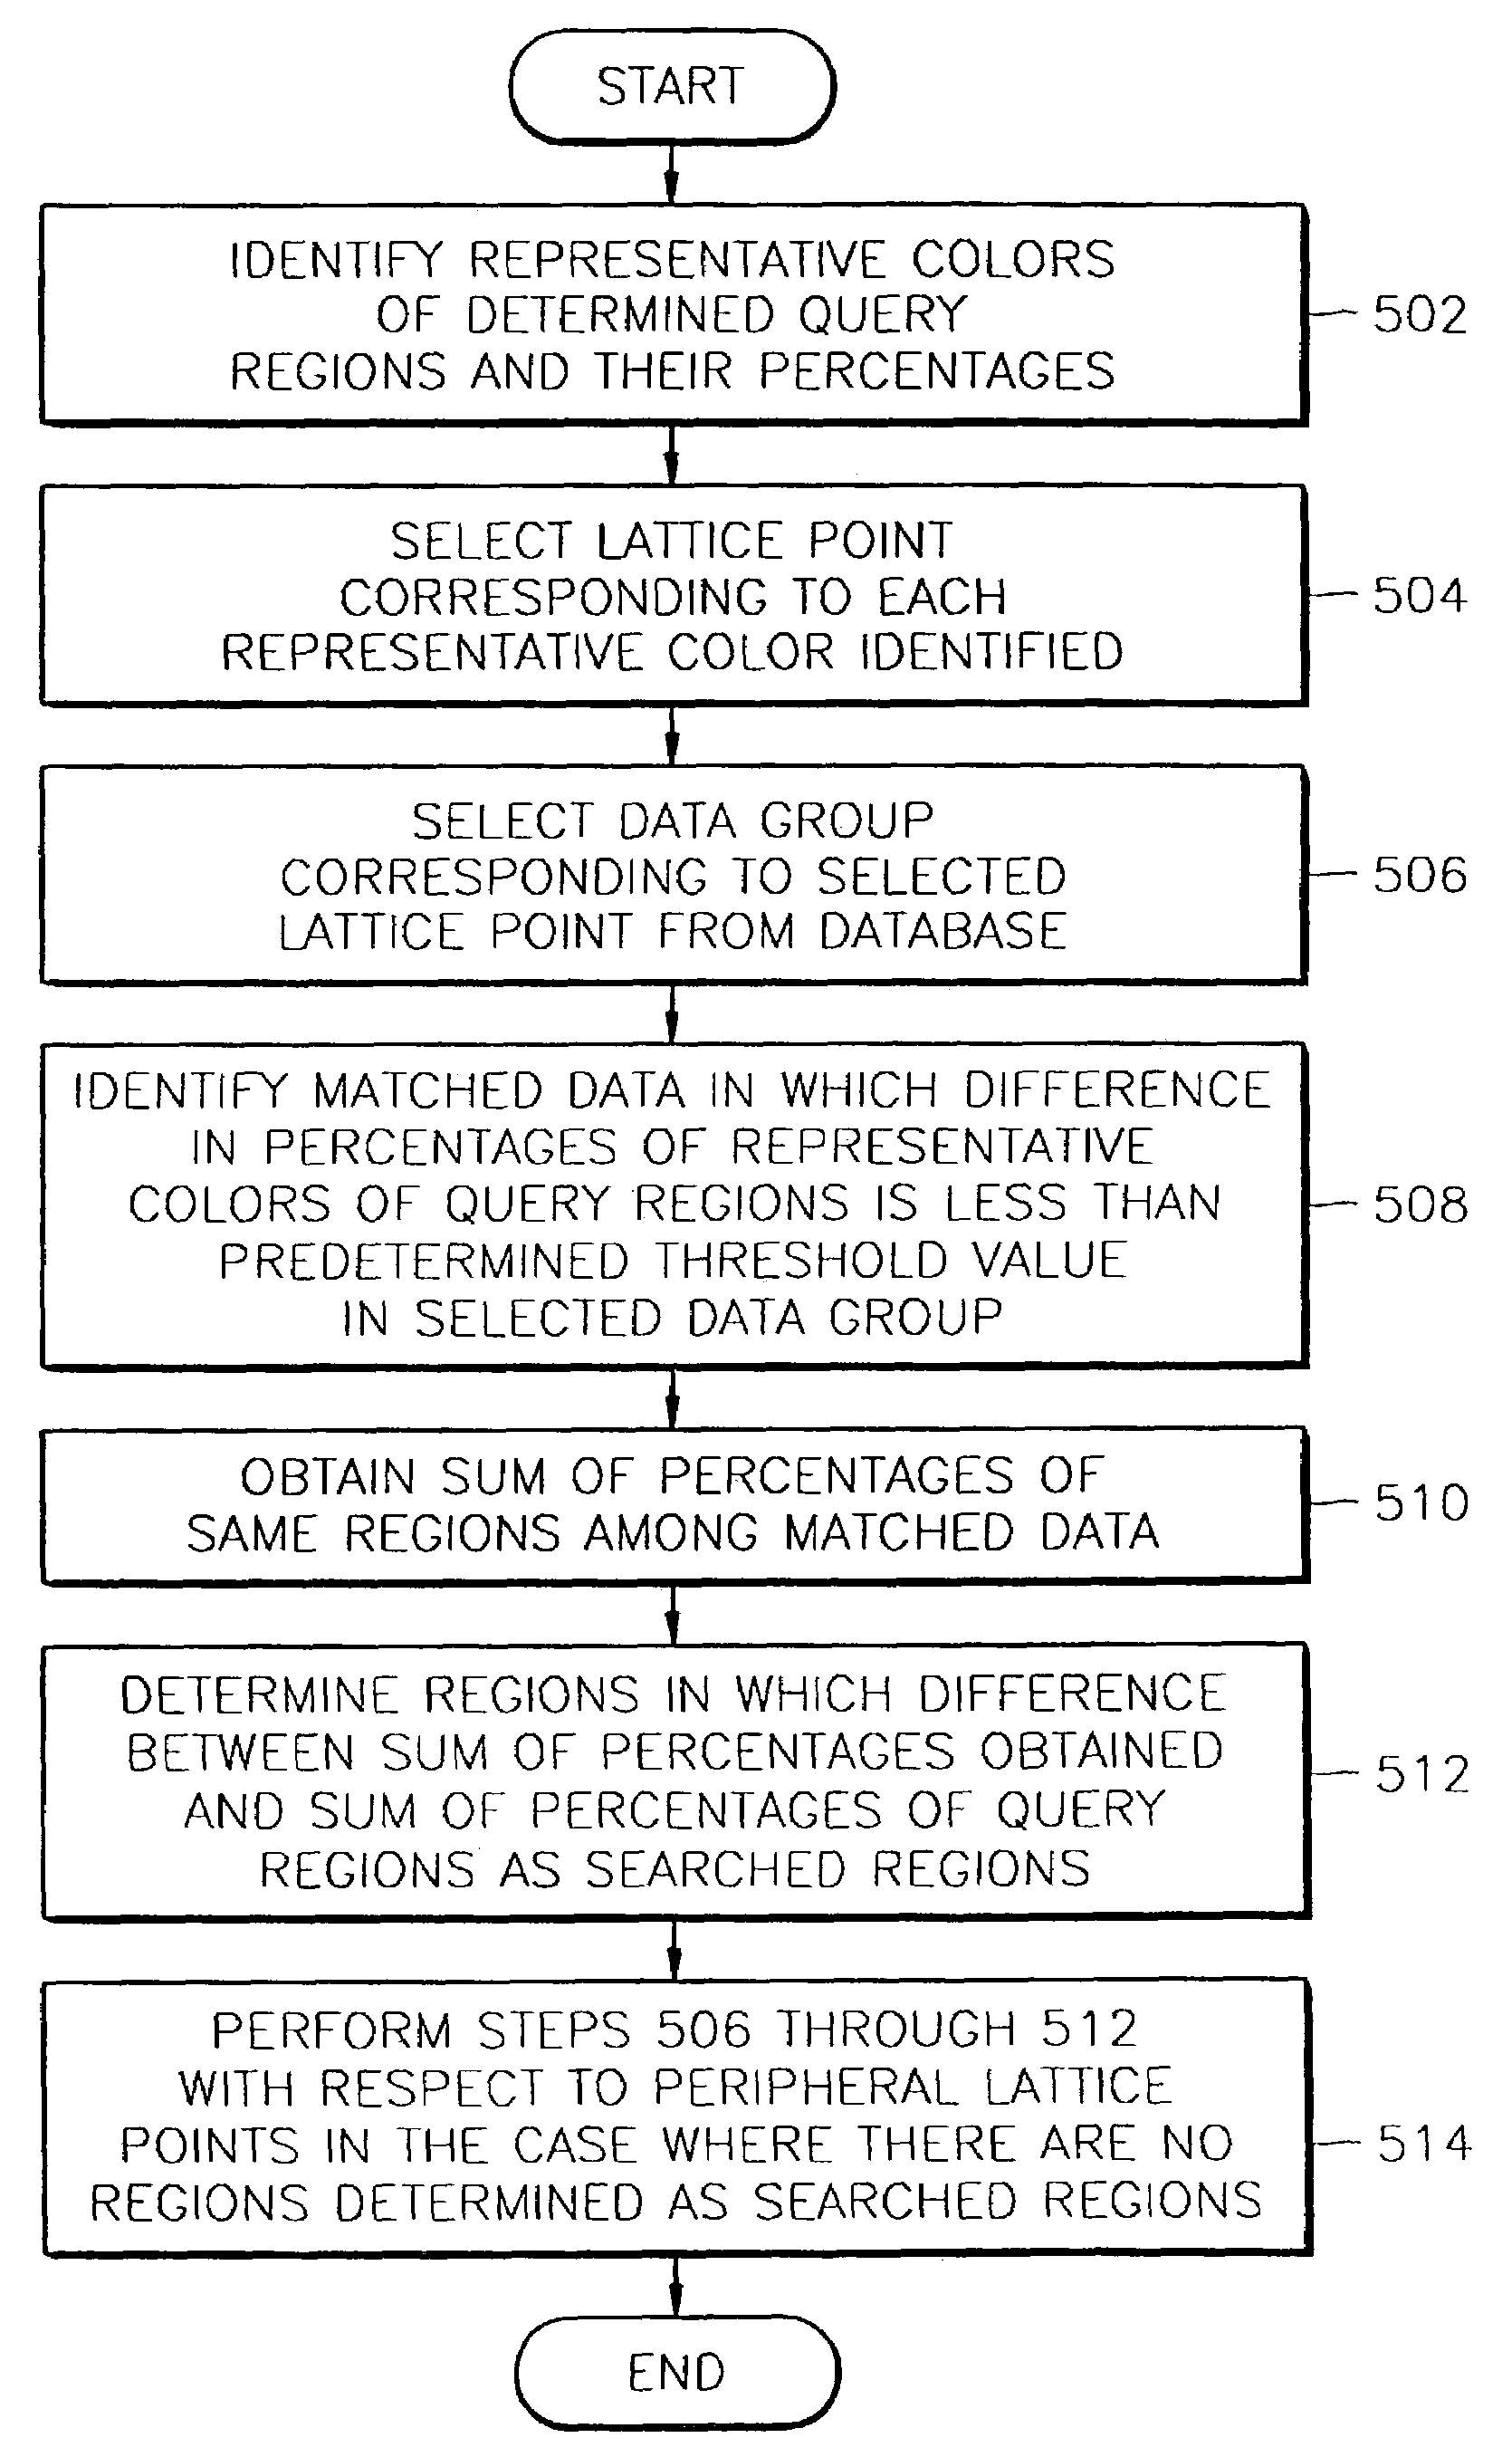 Color image processing method